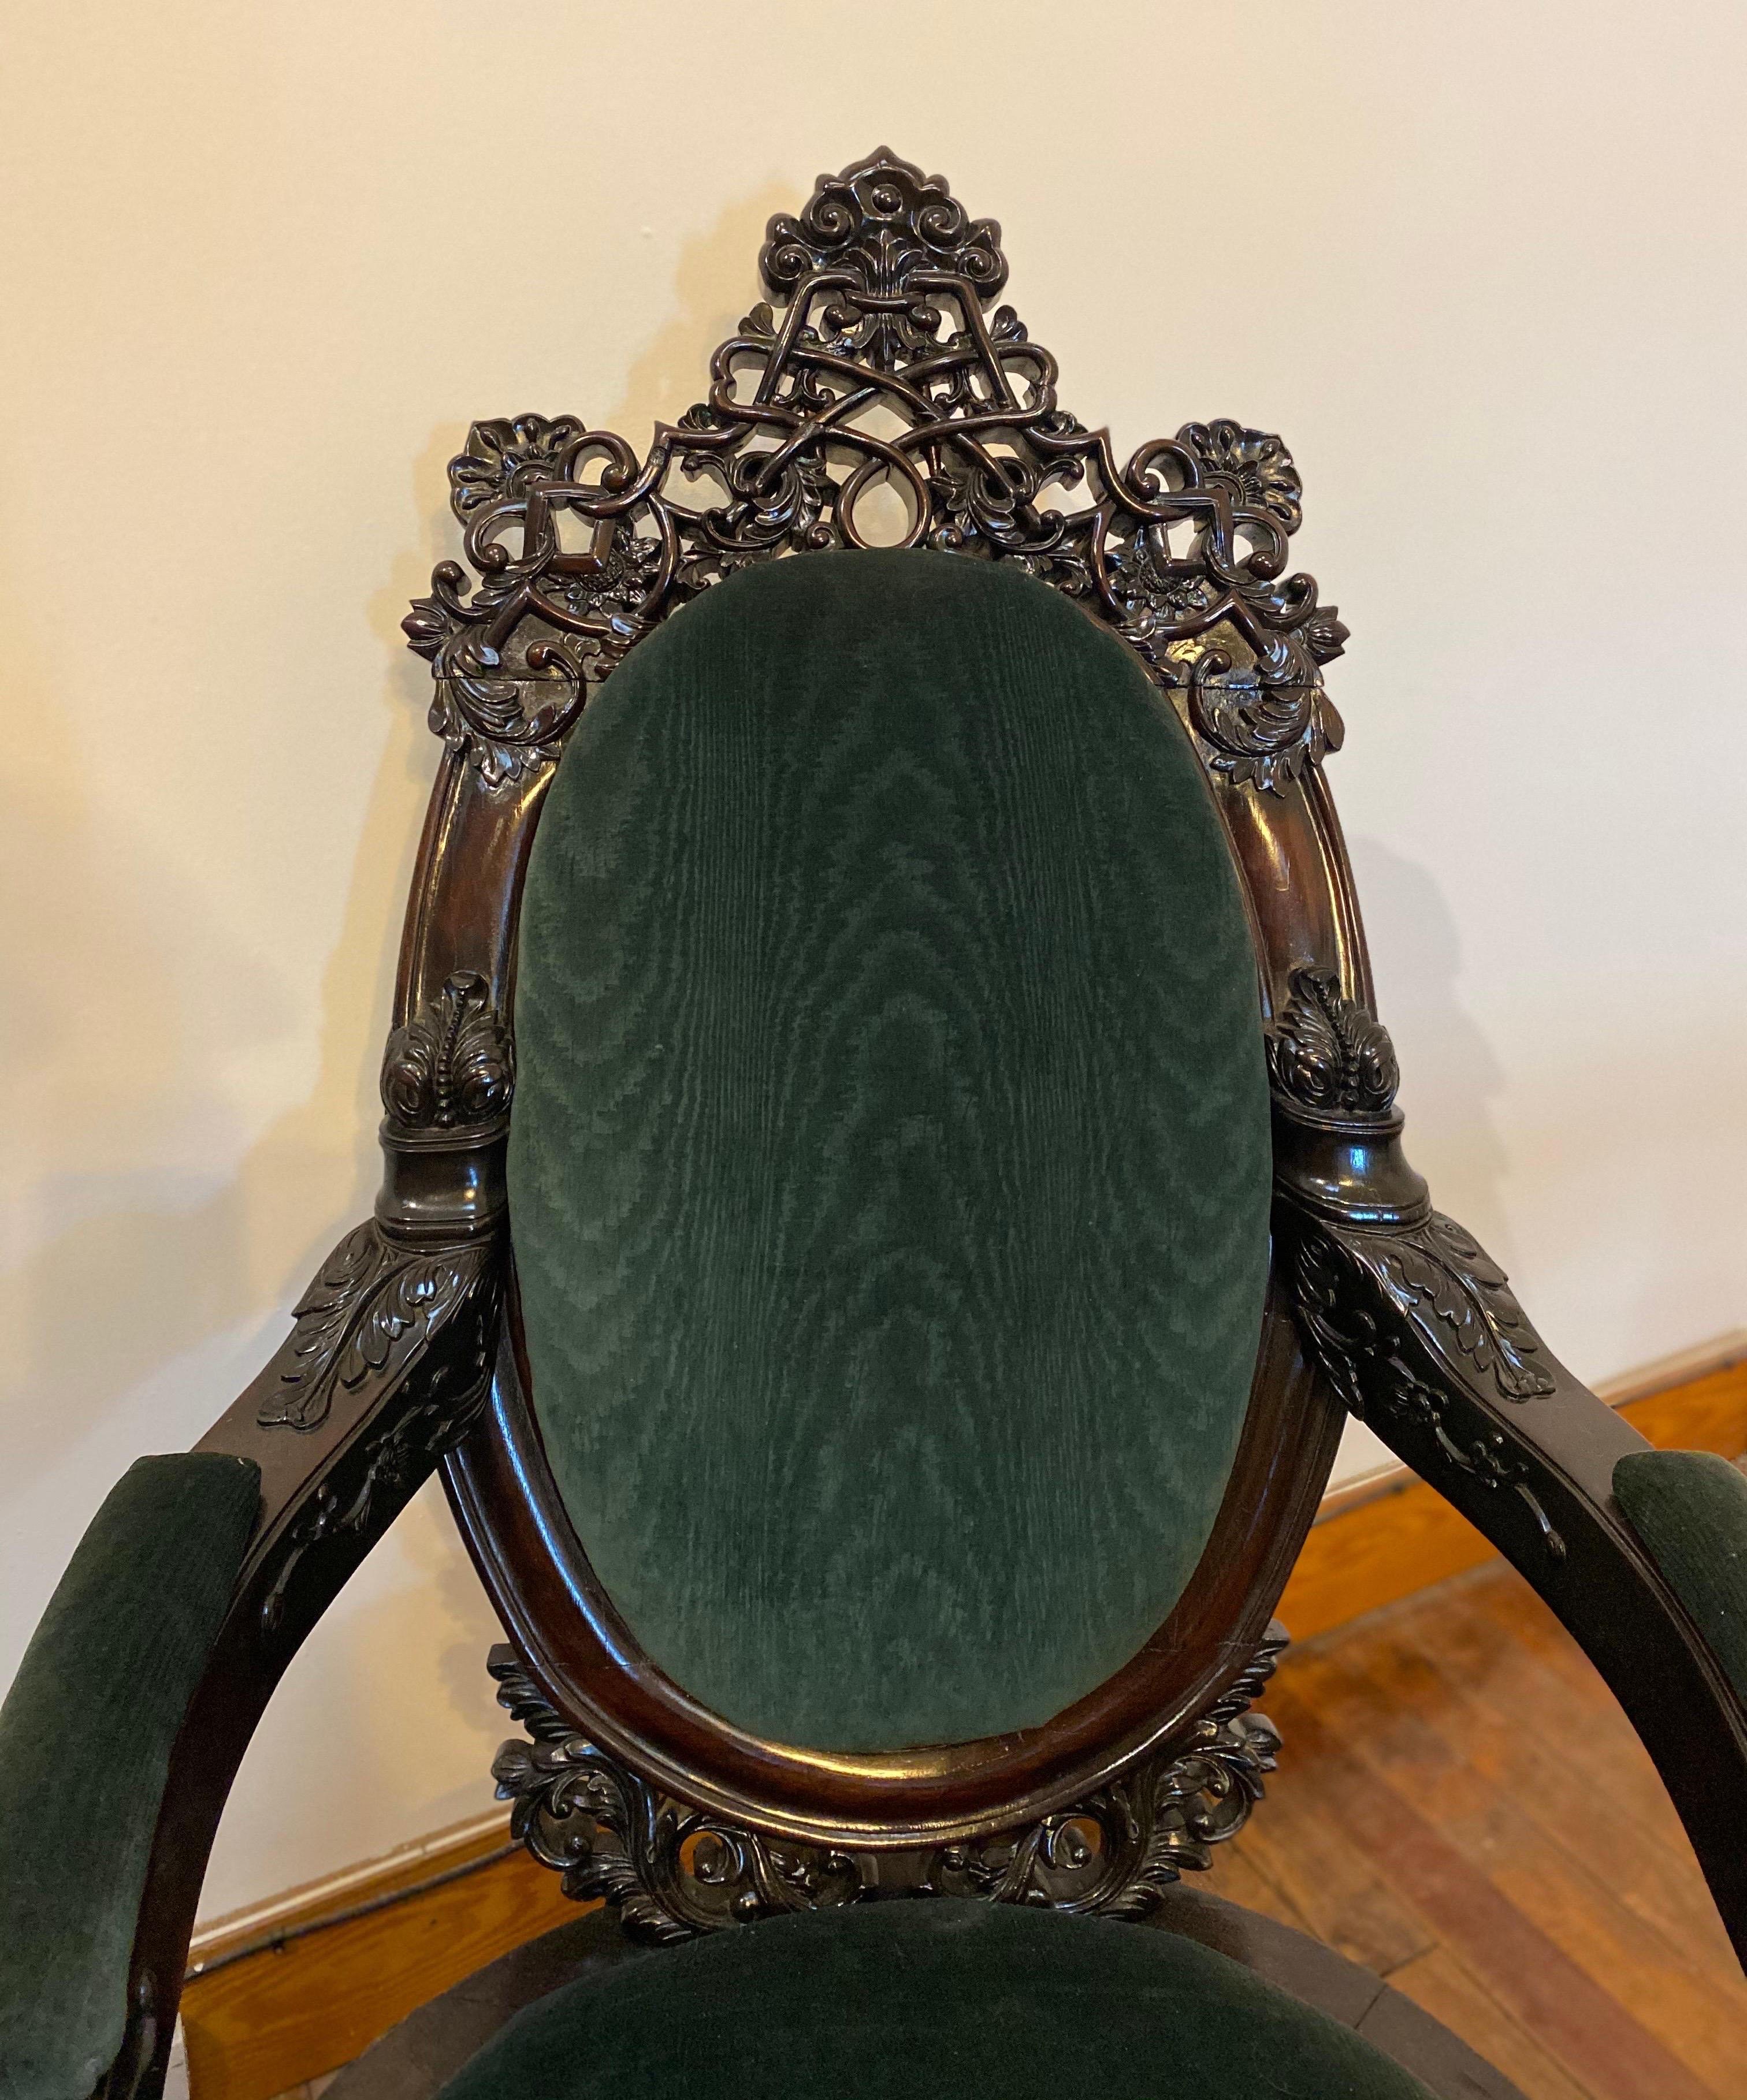 Incredibly carved 19th century Anglo-Indian rosewood palatial chairs. Highly carved from top to bottom with drop seats and backs. These chairs most likely came from a palace during the Raj period.